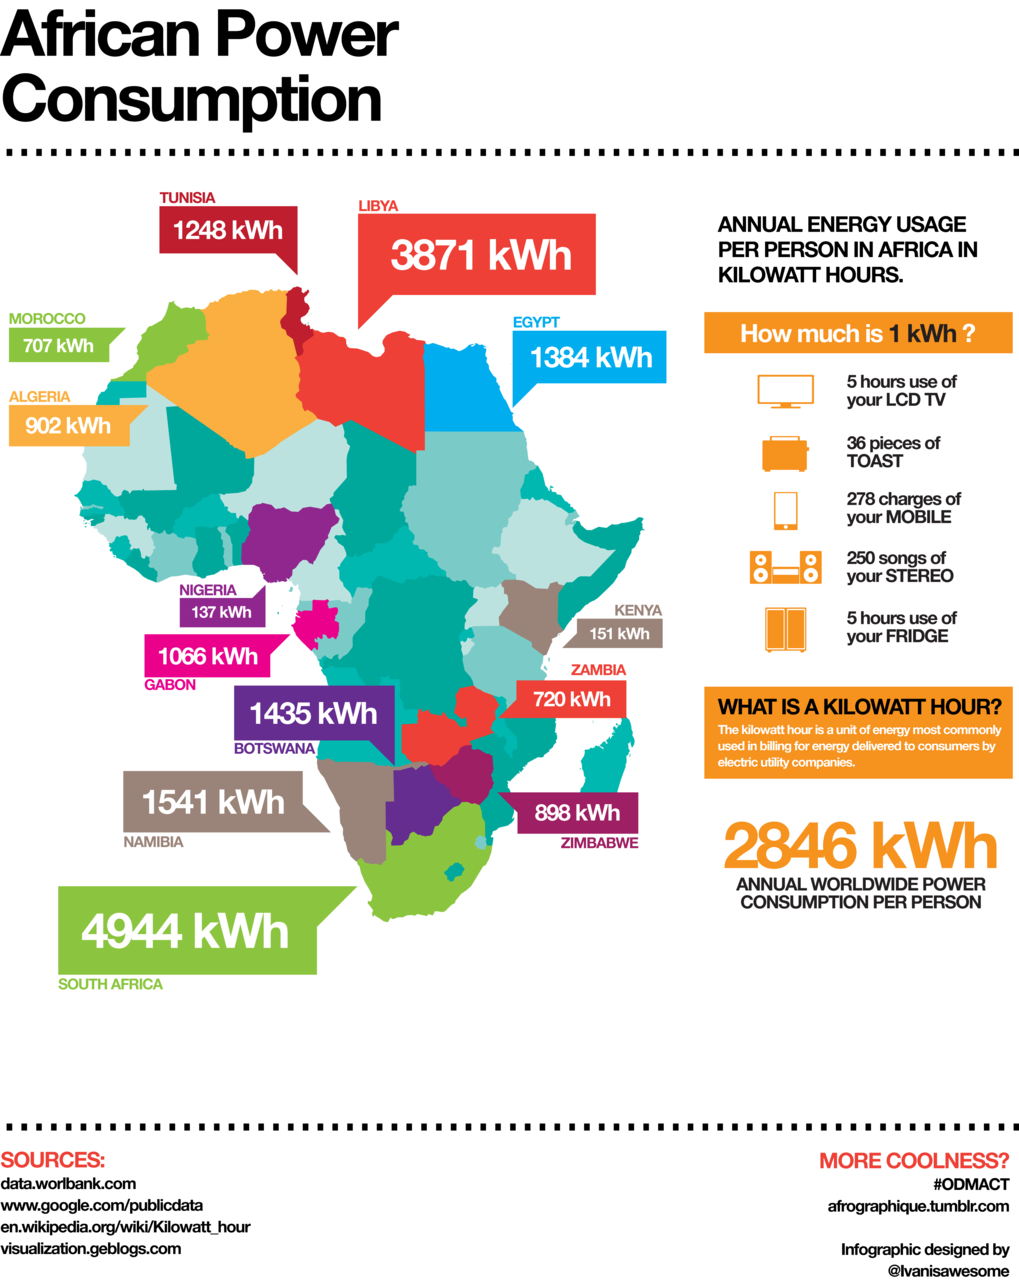 Infographic charting annual power consumption per person across several countries in Africa.